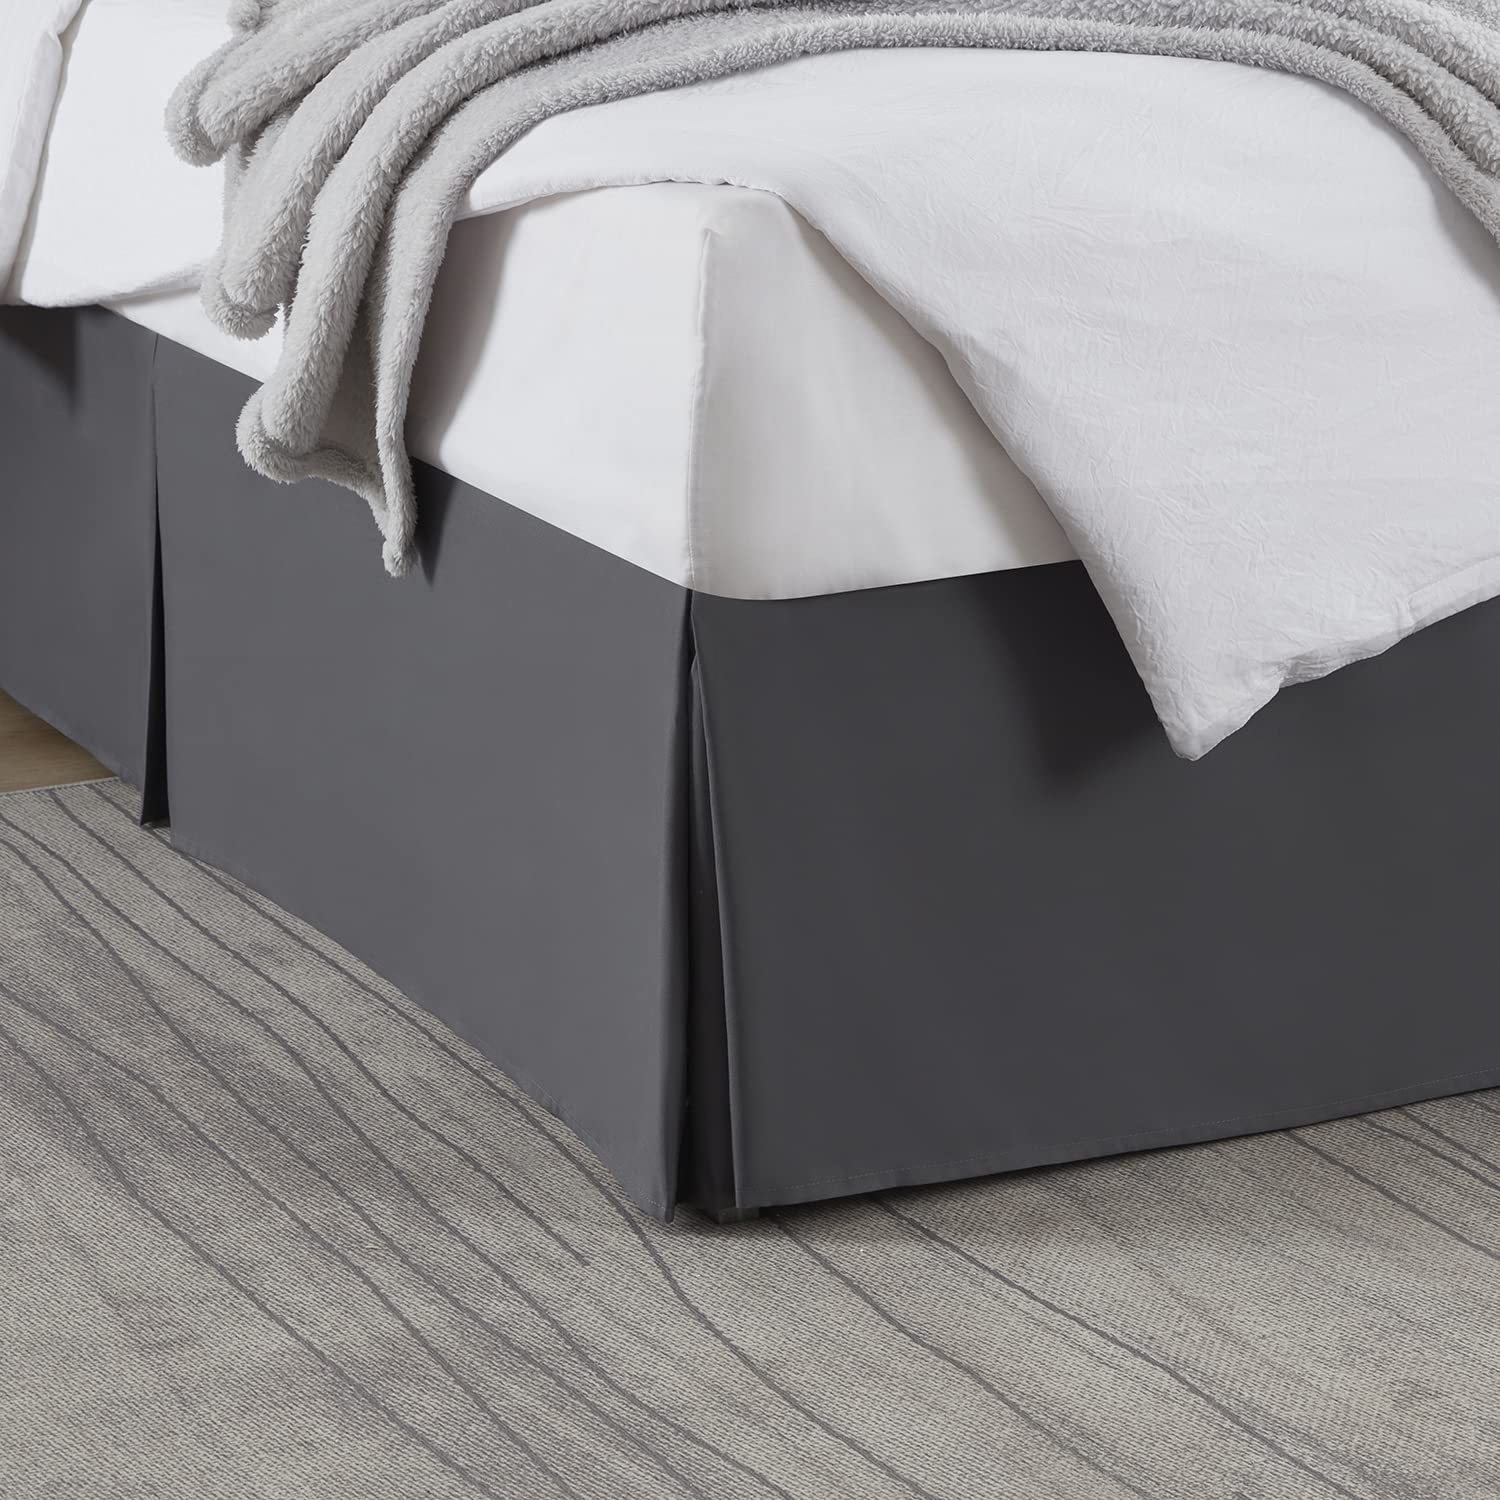 Book Cover Nestl Dark Gray Bed Skirt Queen Size - Queen Bed Skirt 14 Inch Drop - Brushed Microfiber Bed Skirts - Hotel Quality Pleated Bed Skirt - Shrinkage & Fade Resistant Queen Dark Gray